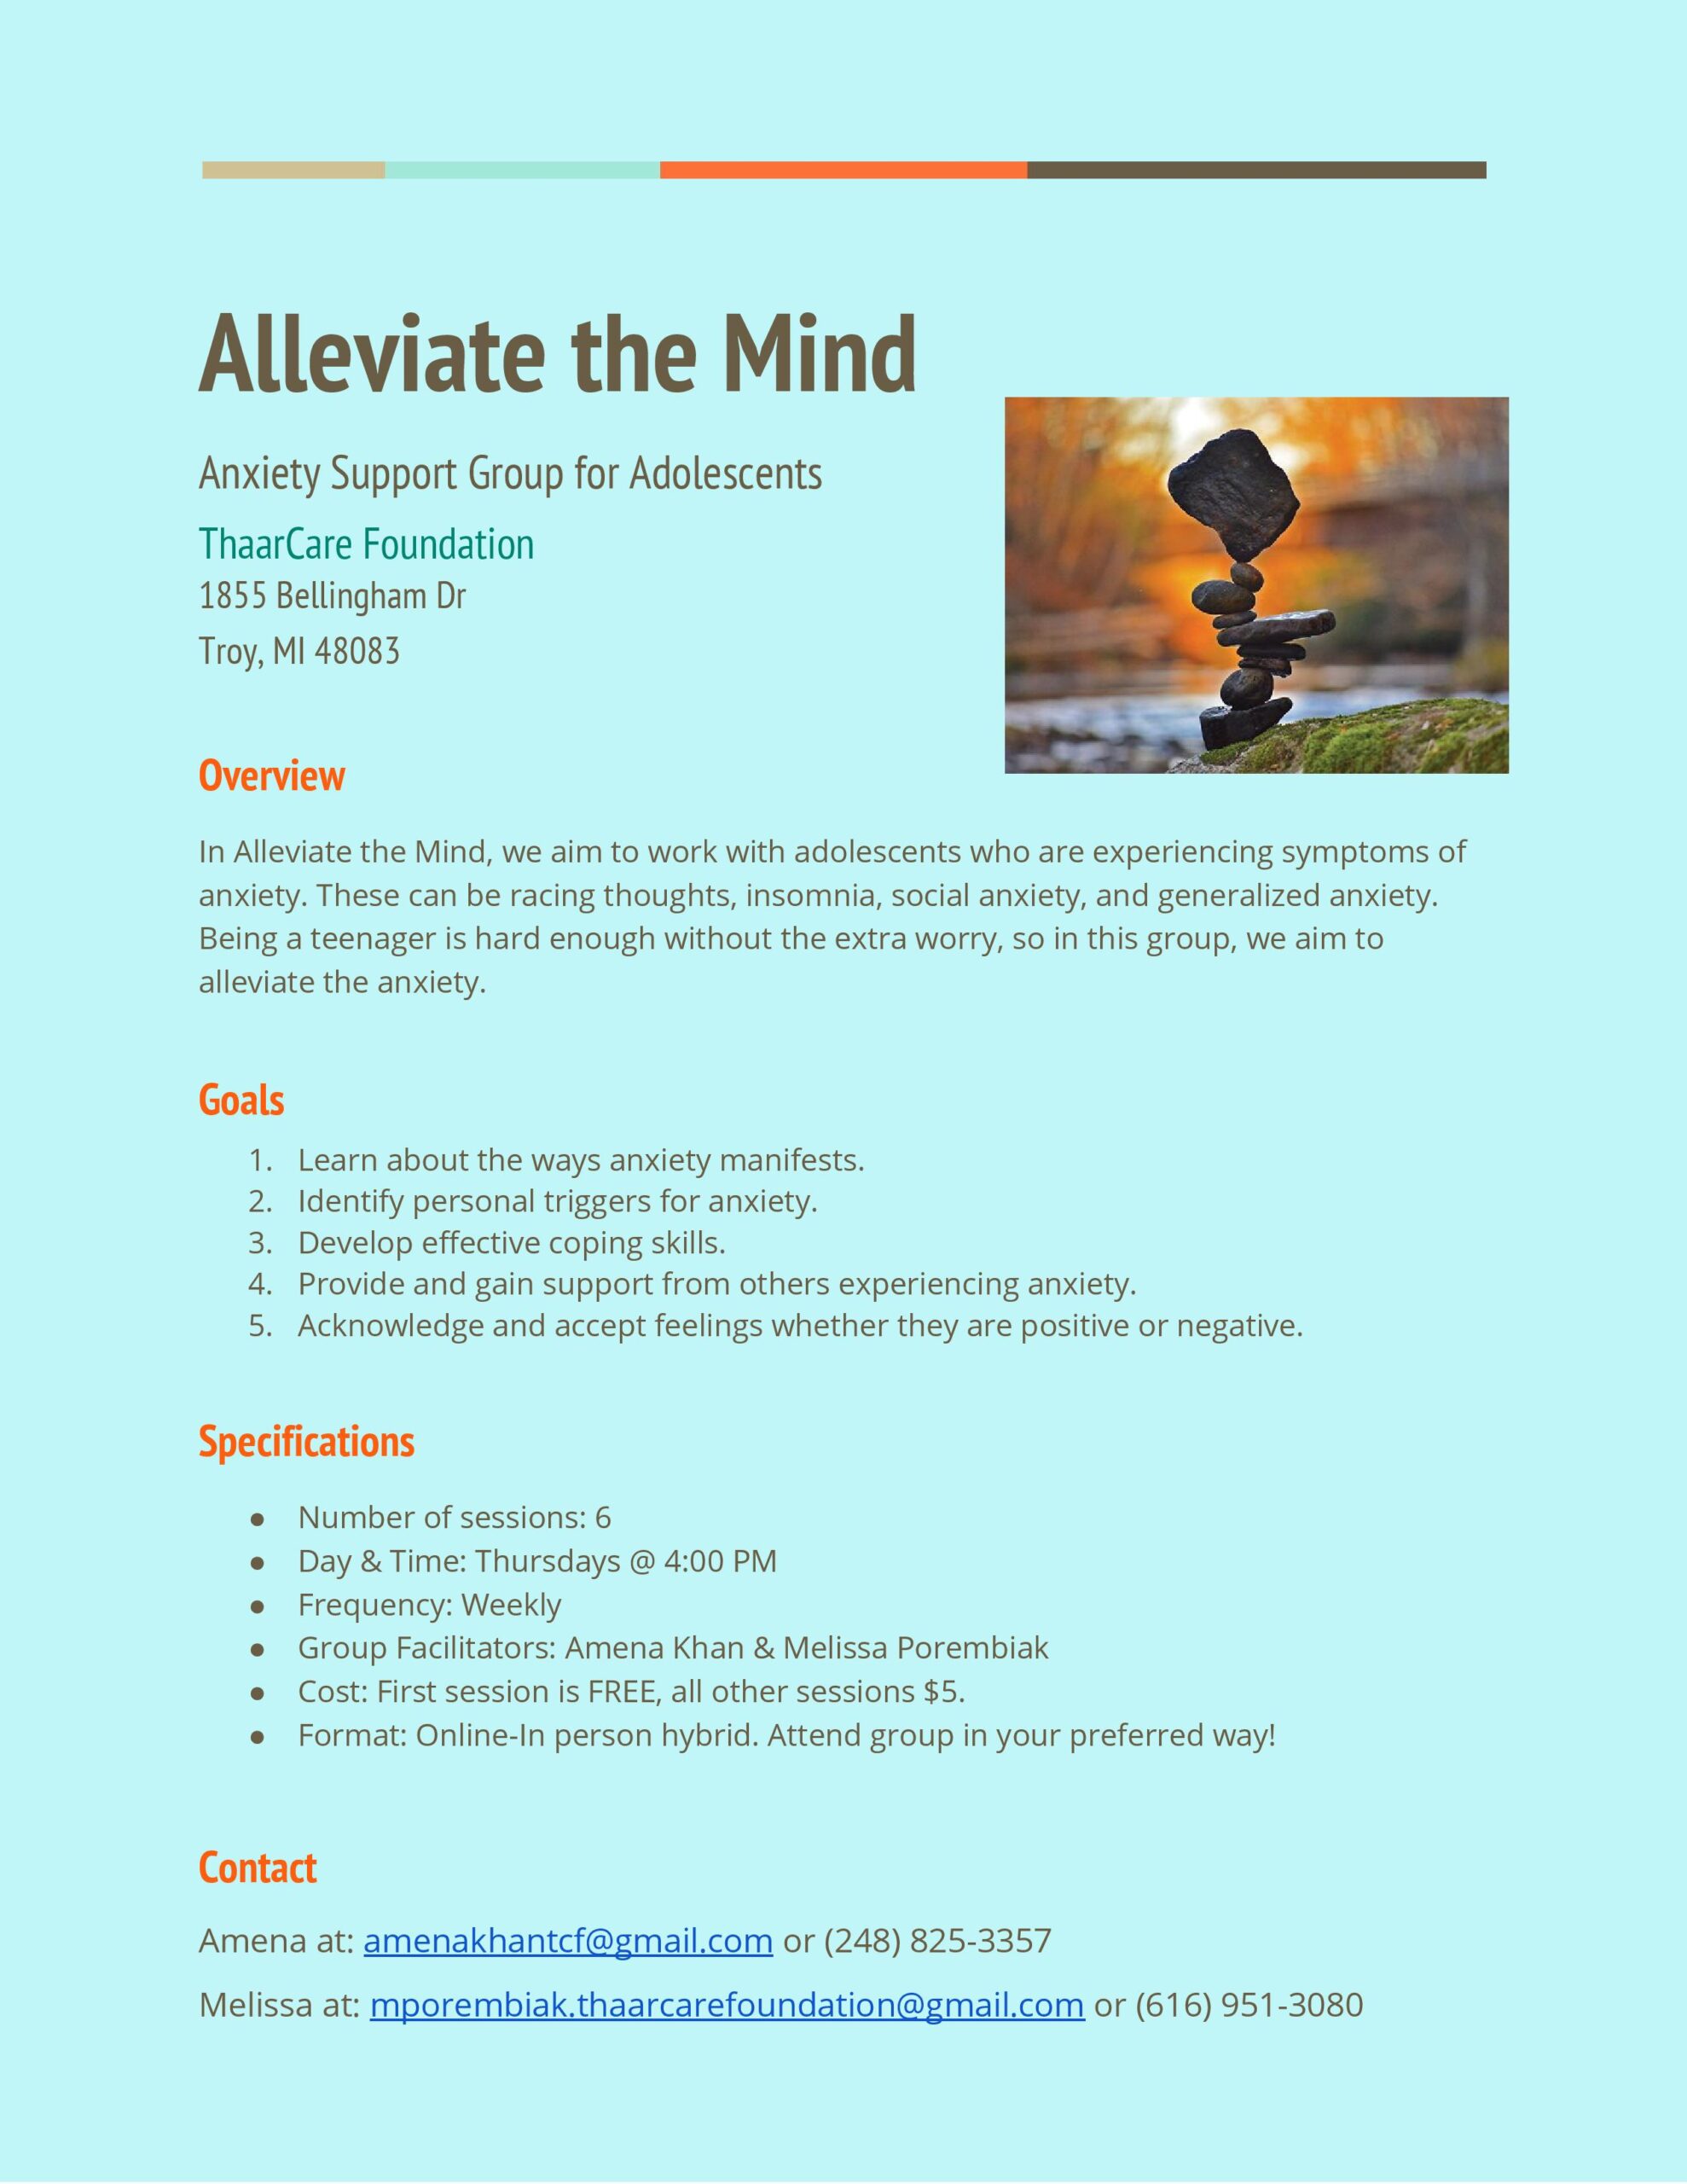 Alleviate the Mind Group